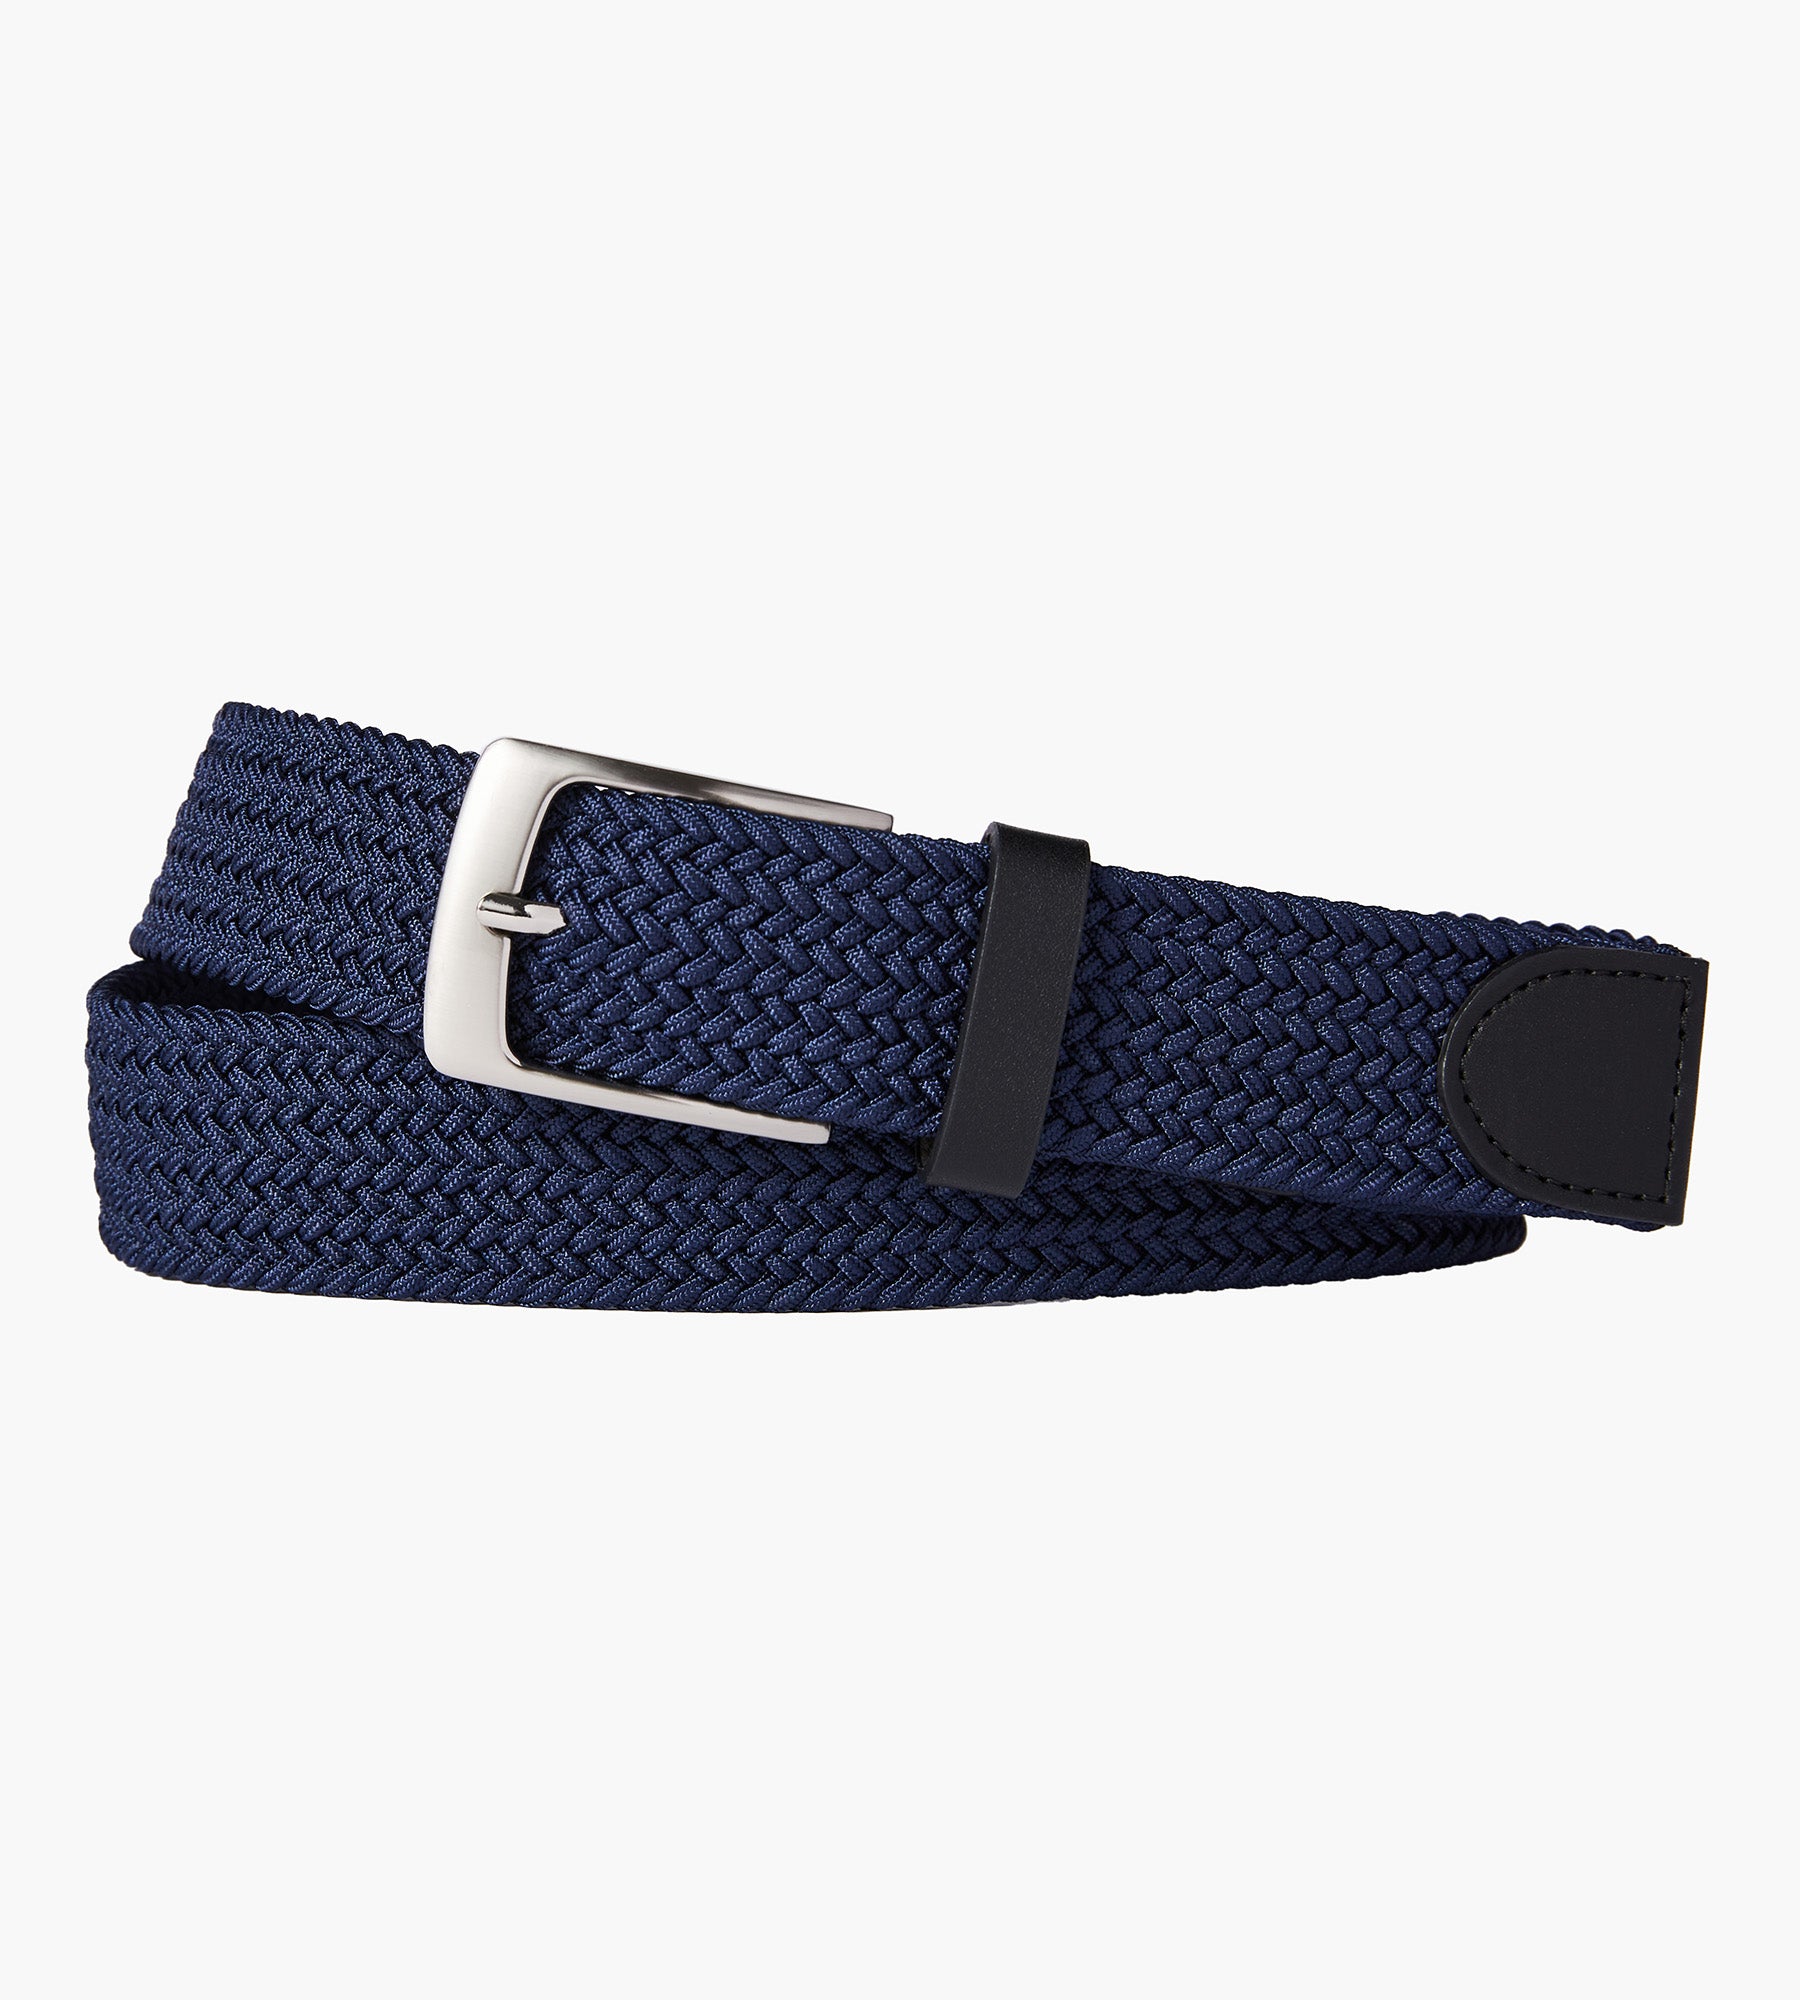 STRETCH BELT - black ONE SIZE - Elasticated belt with magnetic